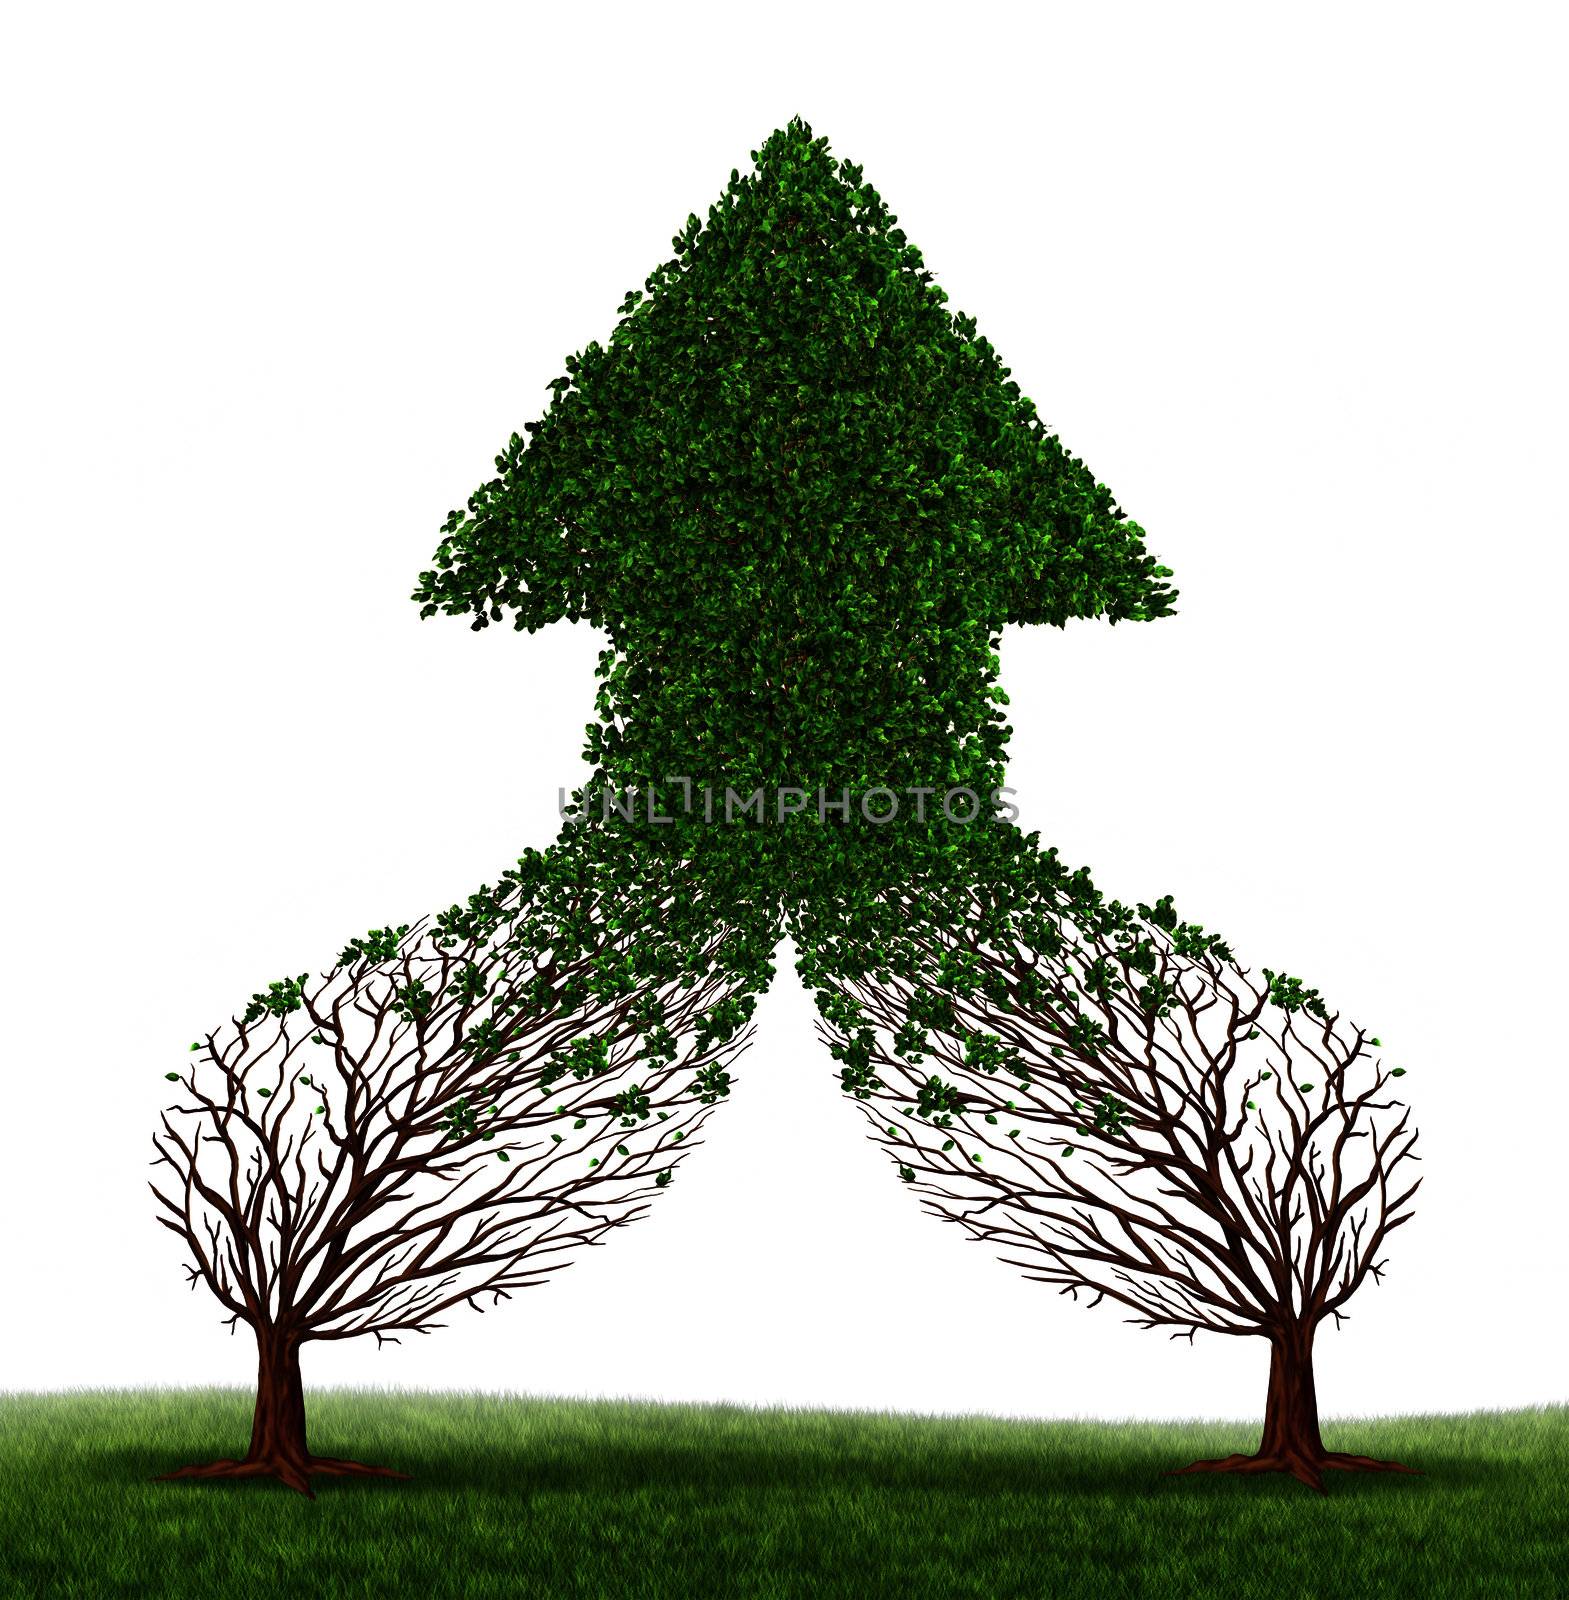 Teamwork Success and working together as a business symbol and financial merger concept with two trees connecting and merging as one forming a healthy growing arrow shaped tree as an icon of growth.